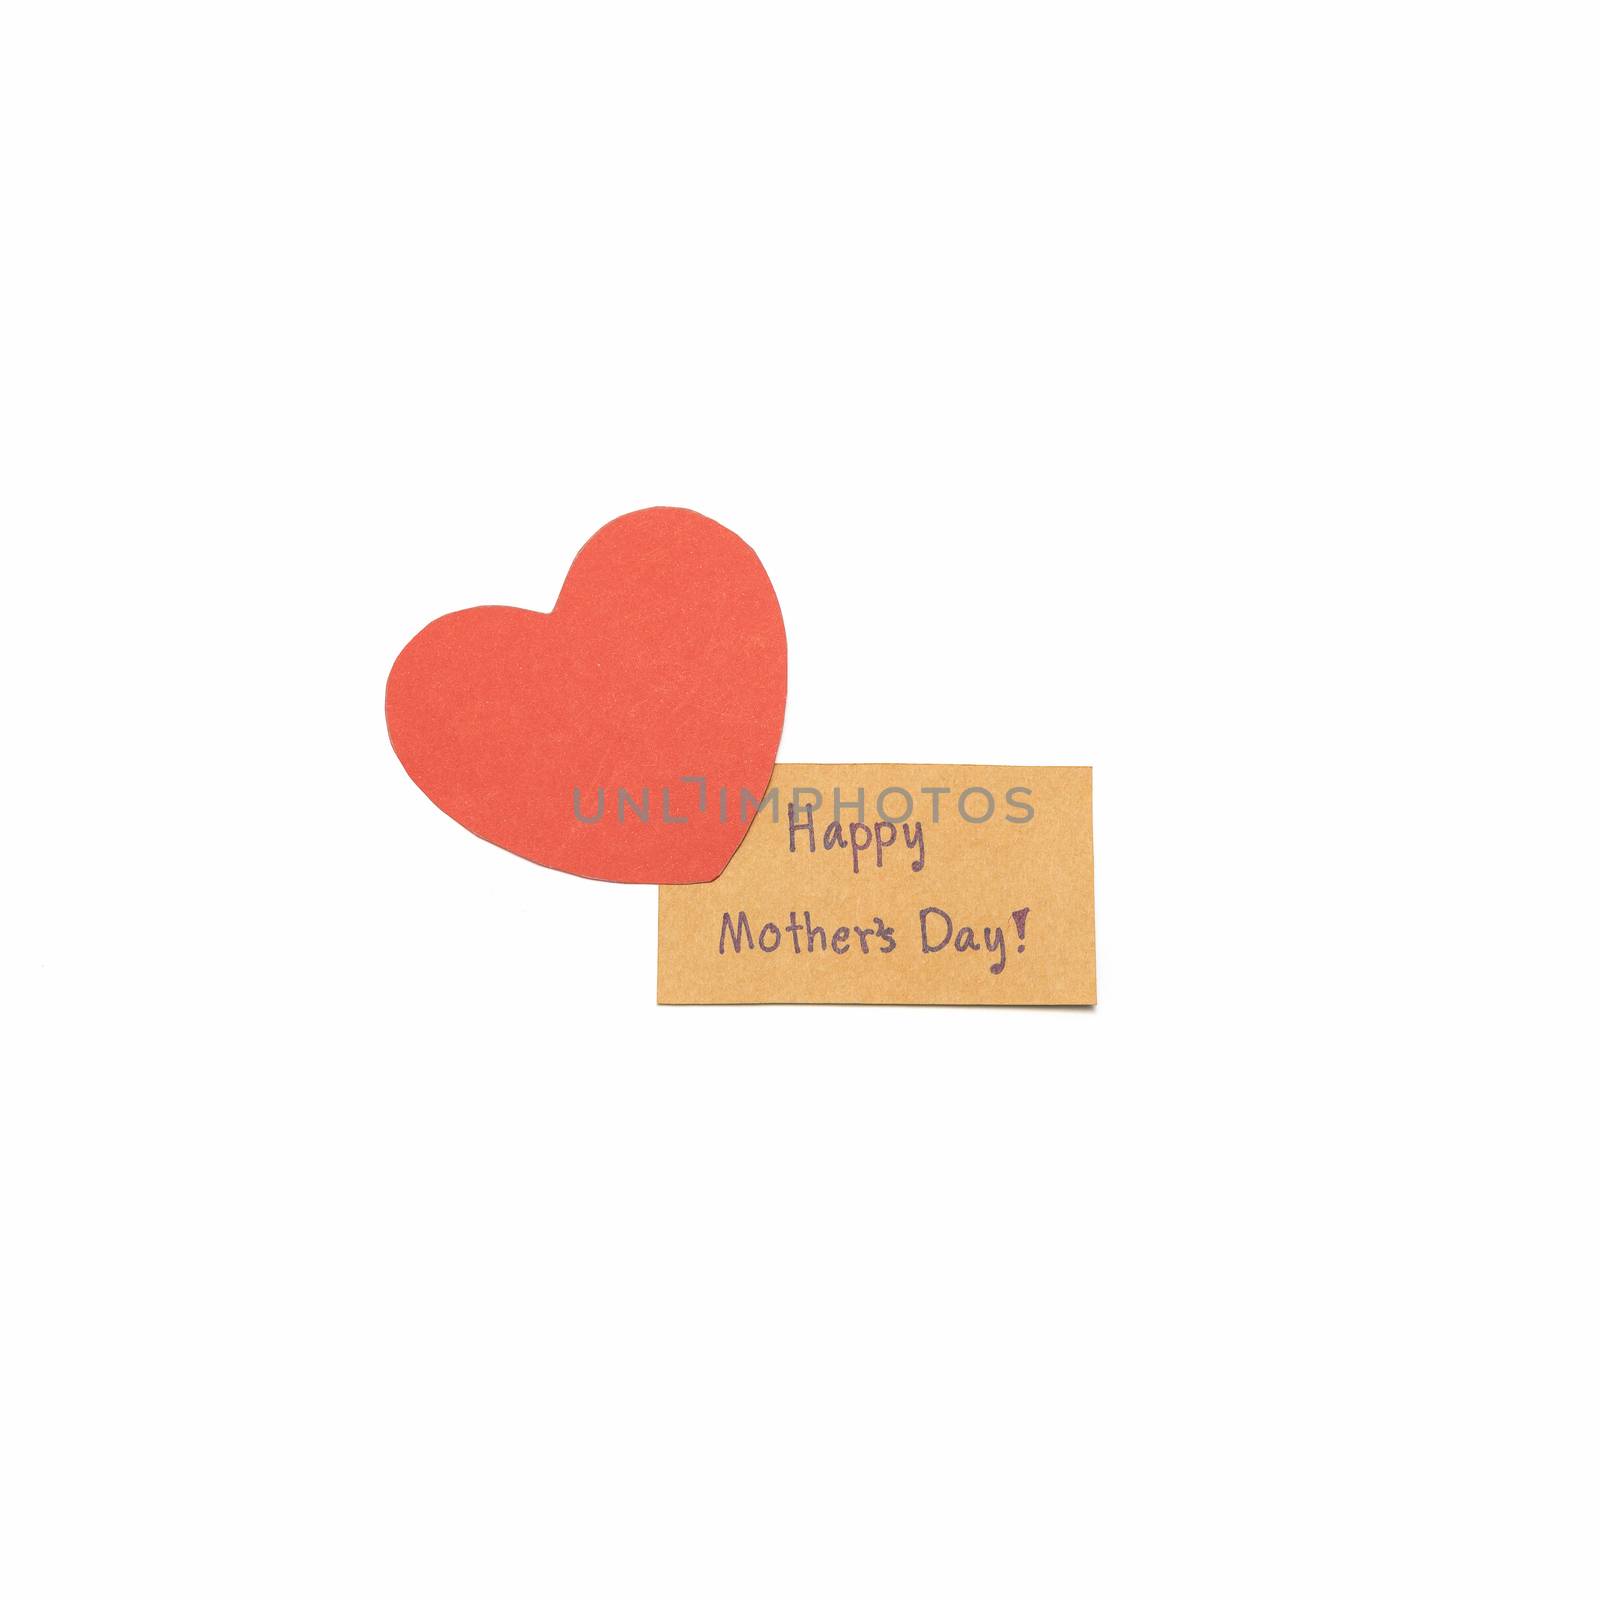 happy mother's day card and heart isolated on white background